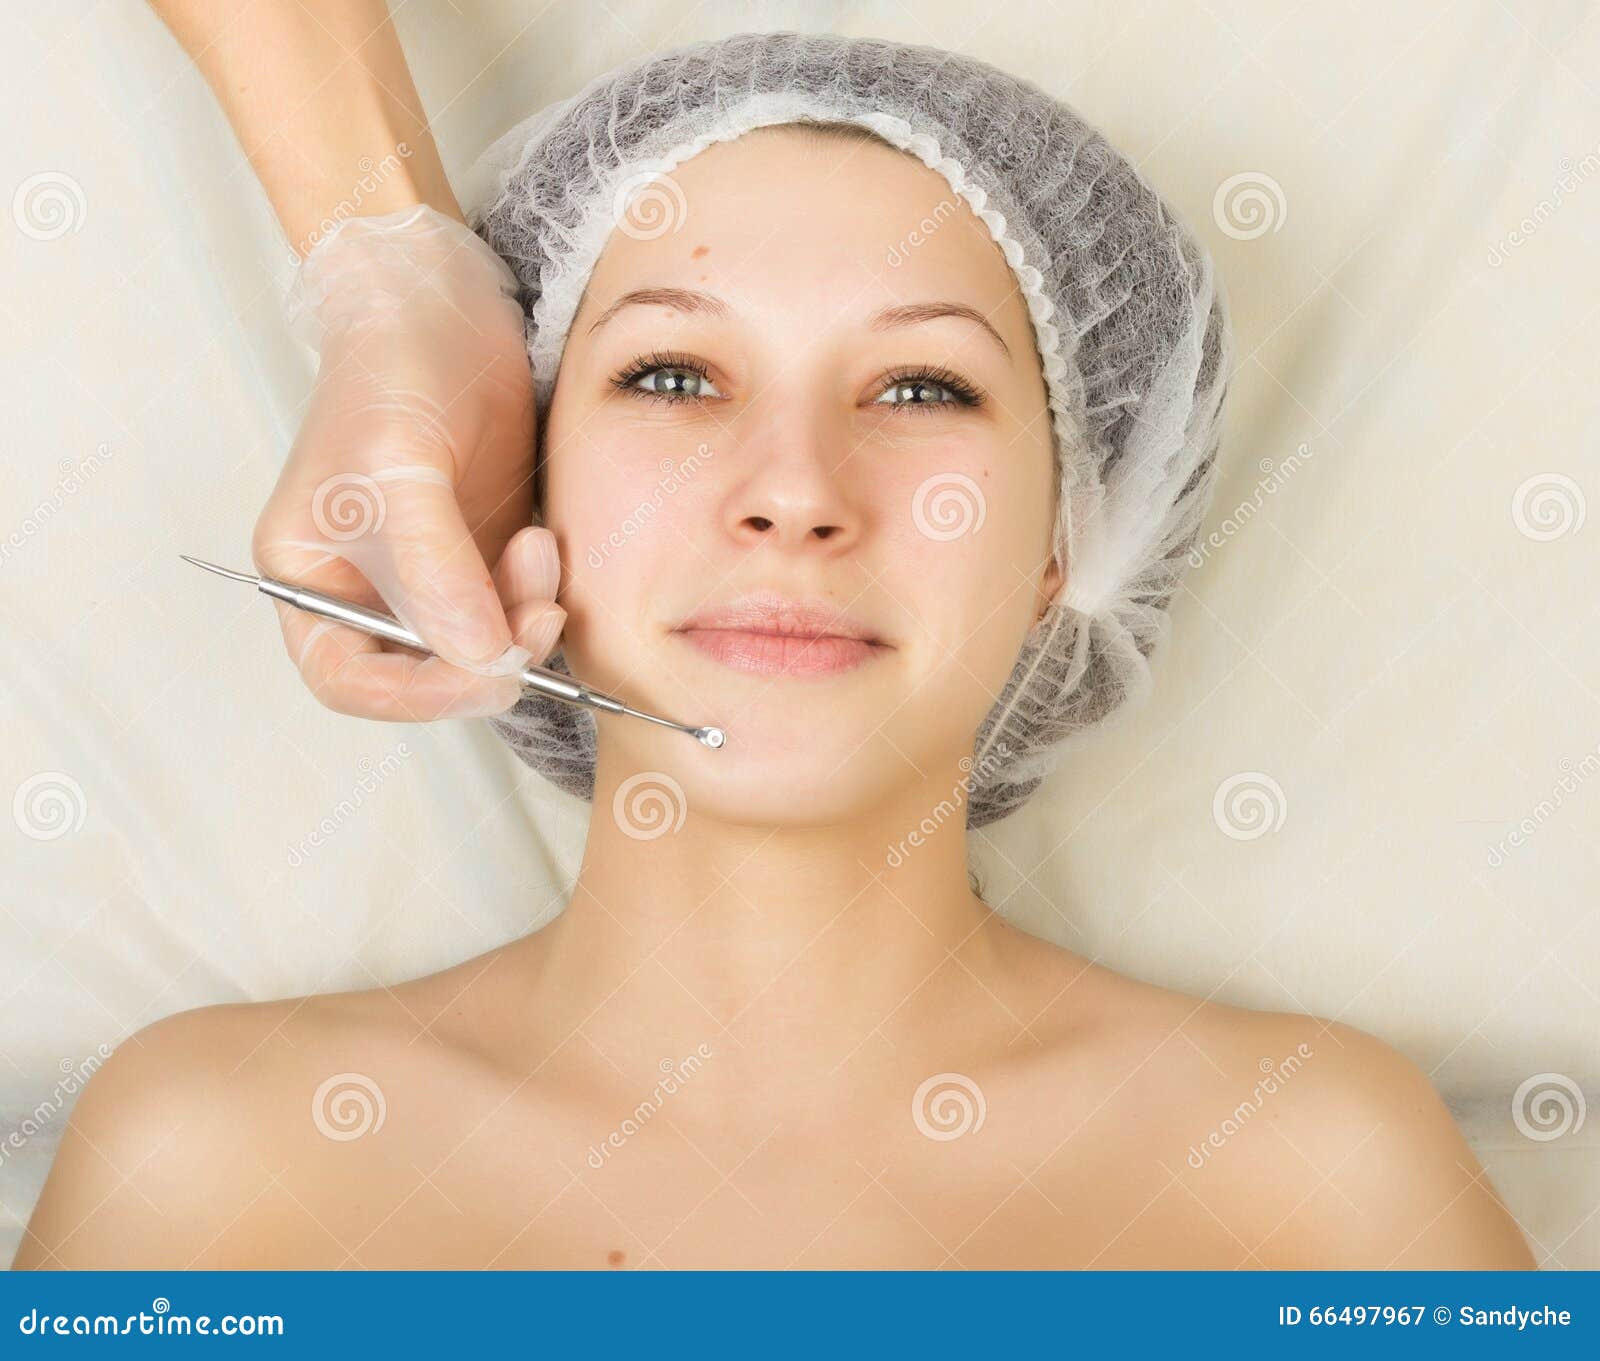 beautician examining the face of a young female client at spa salon. face cleaning, una cuchara. professional